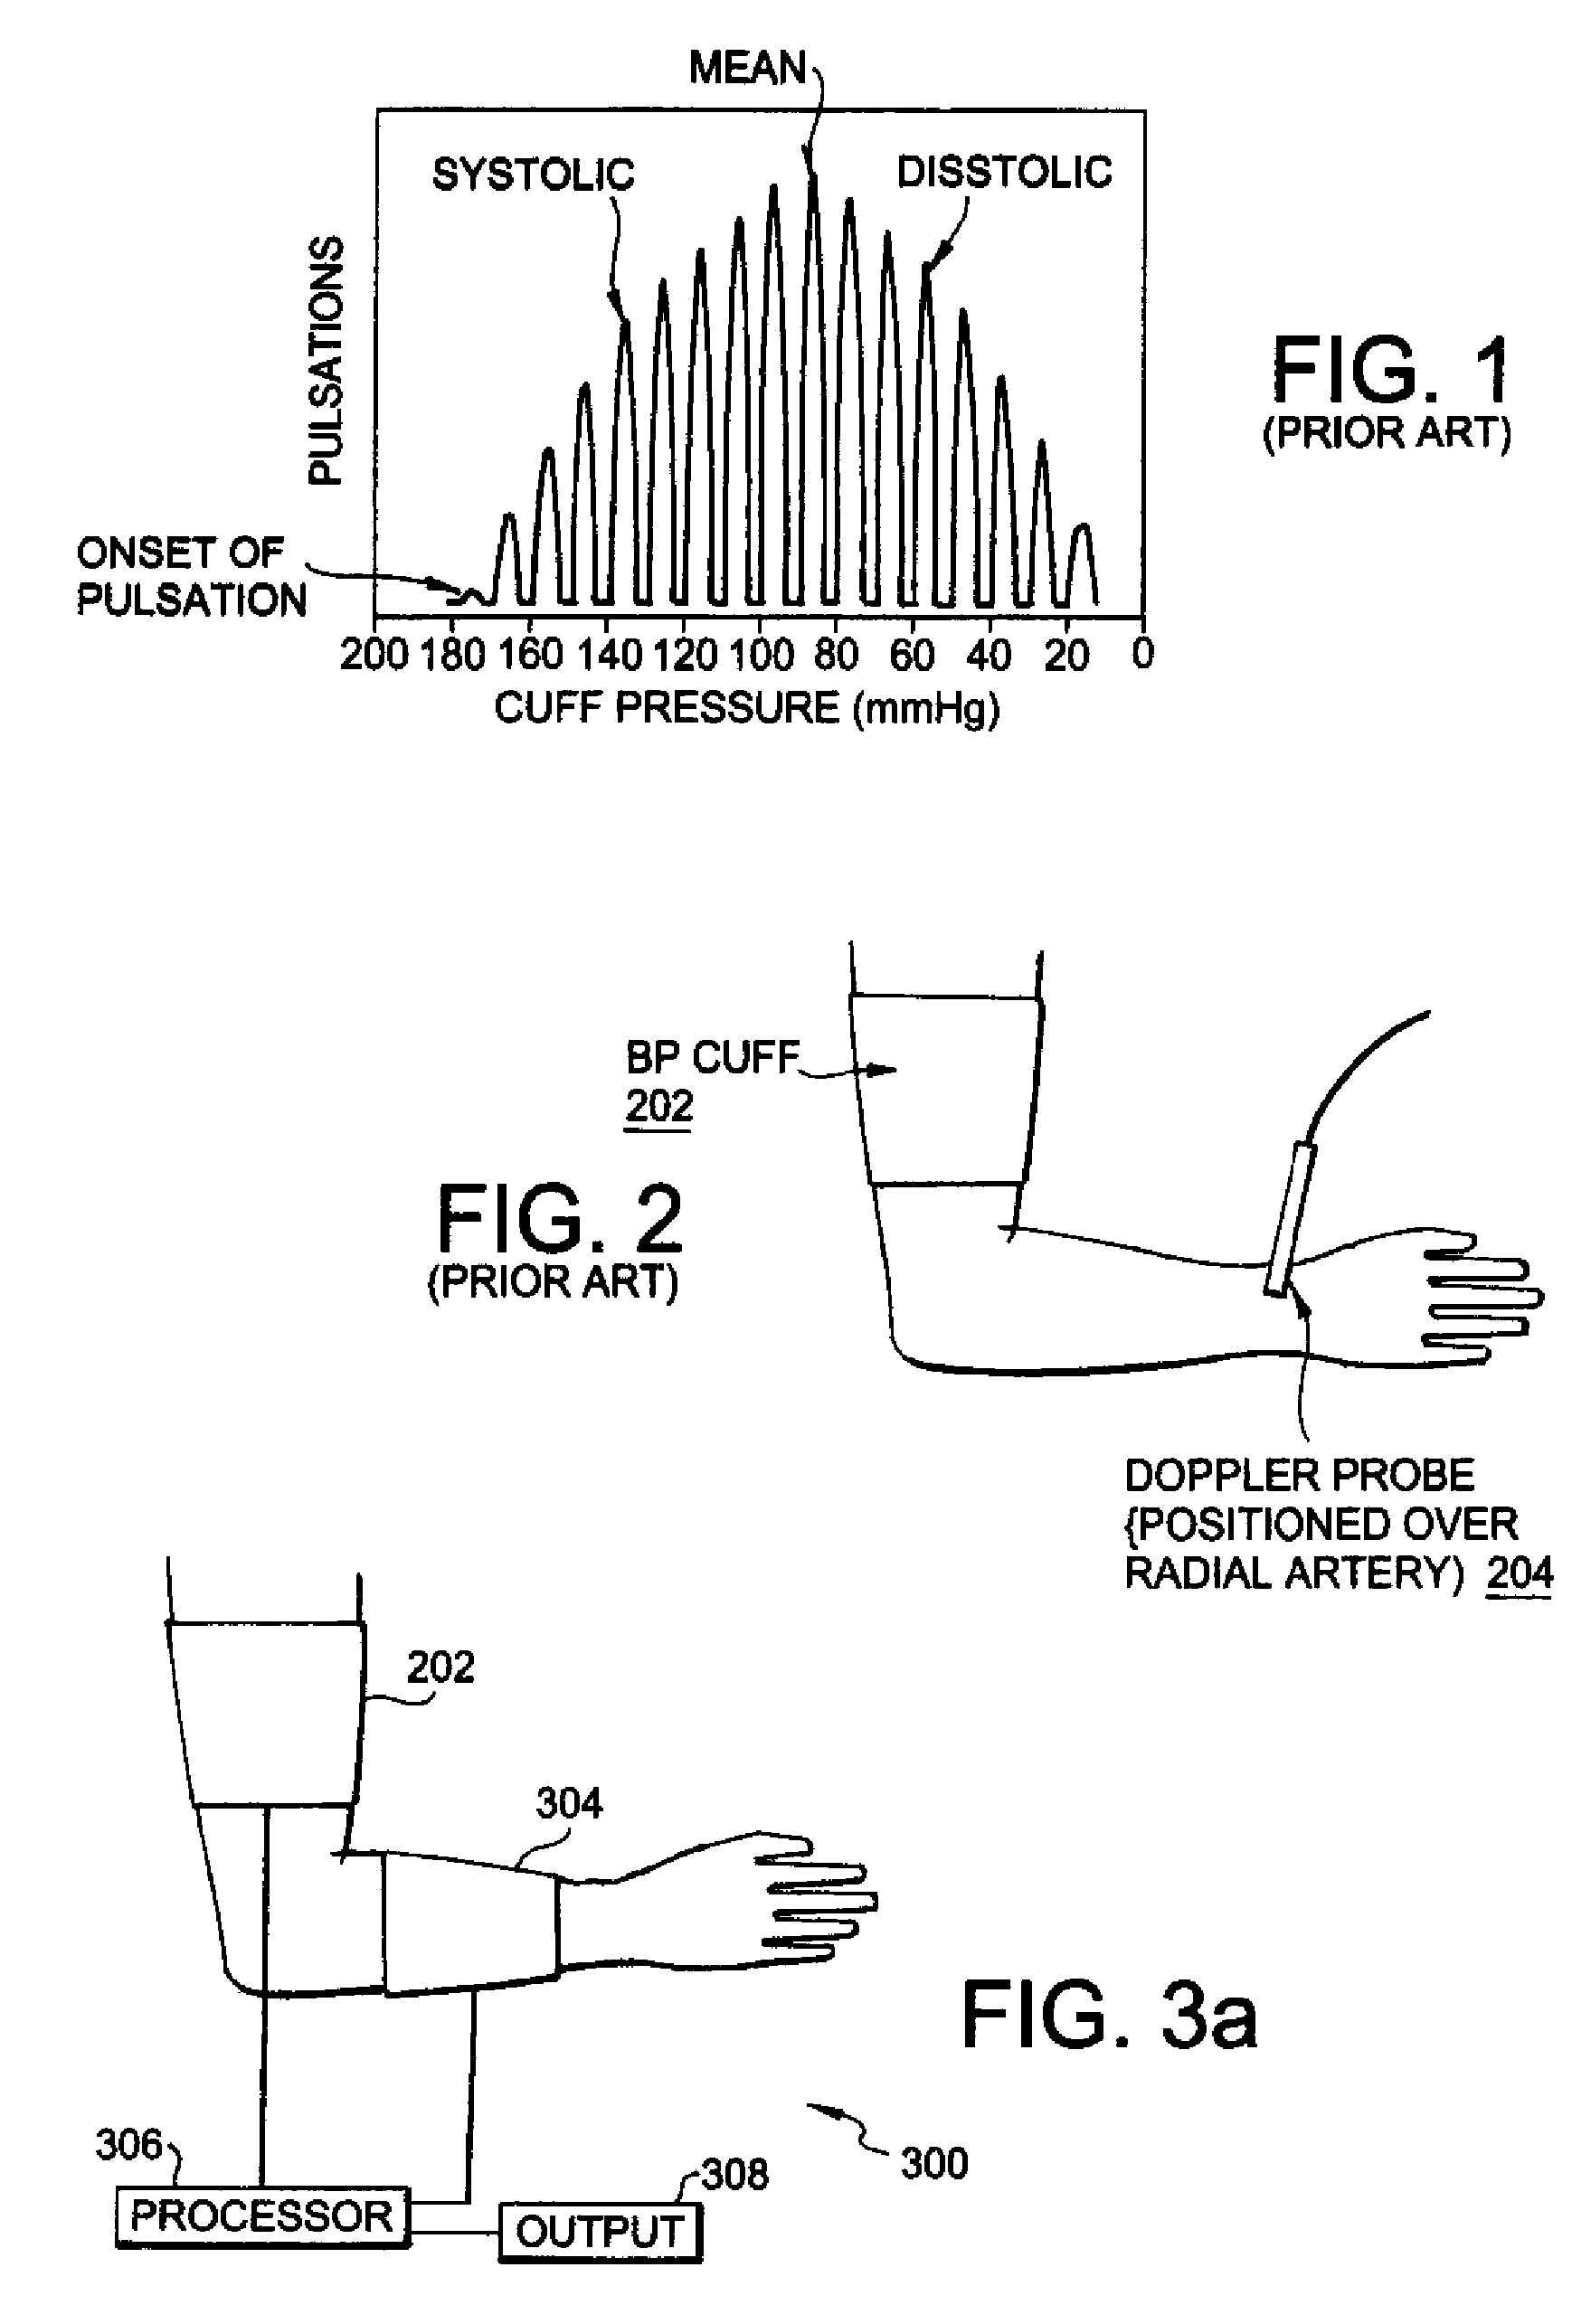 Impedance based device for non-invasive measurement of blood pressure and ankle-brachial index